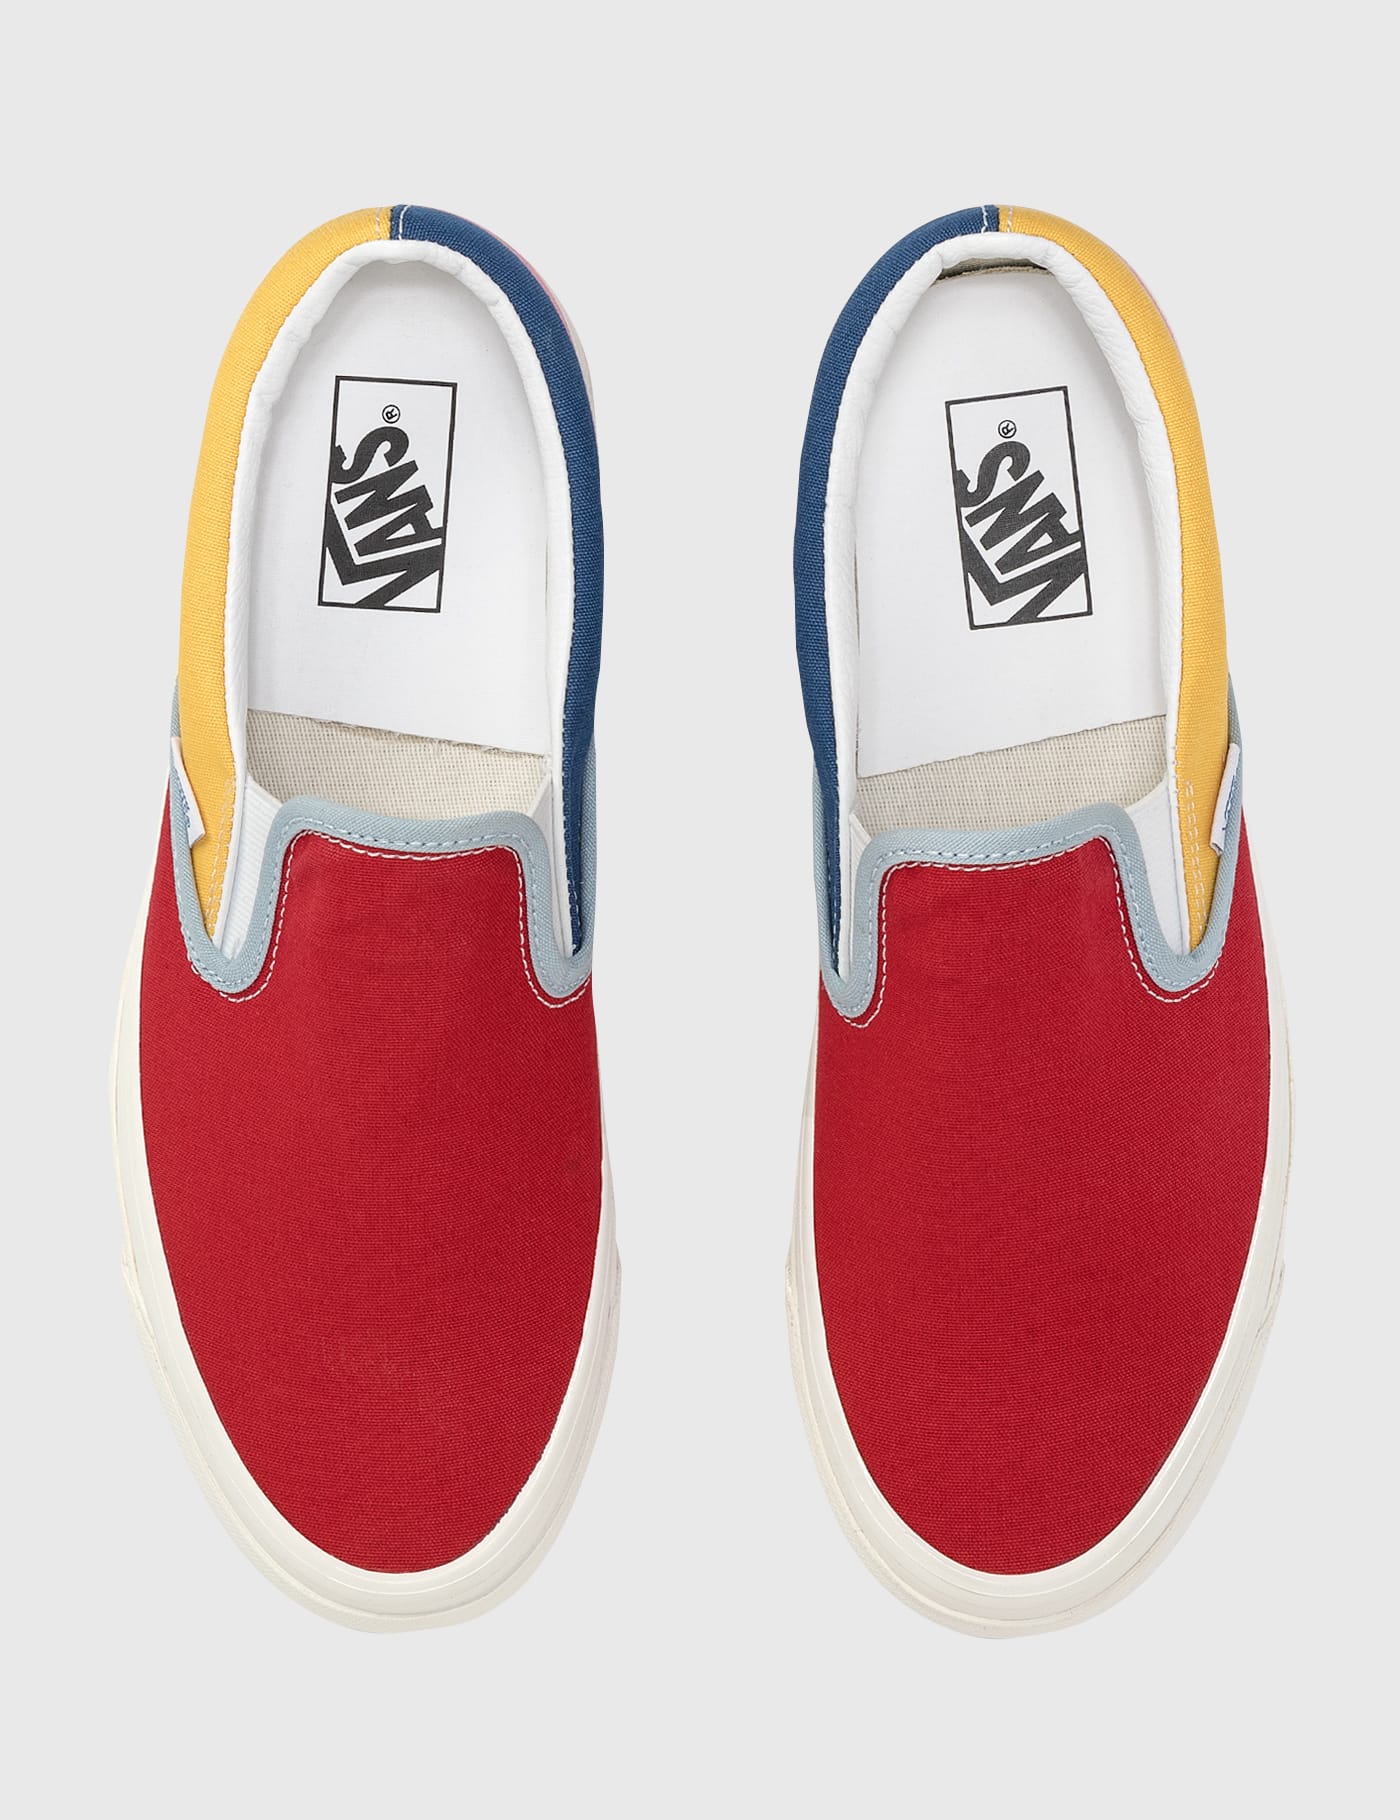 Vans - Classic Slip-on | HBX - Globally Curated Fashion and 